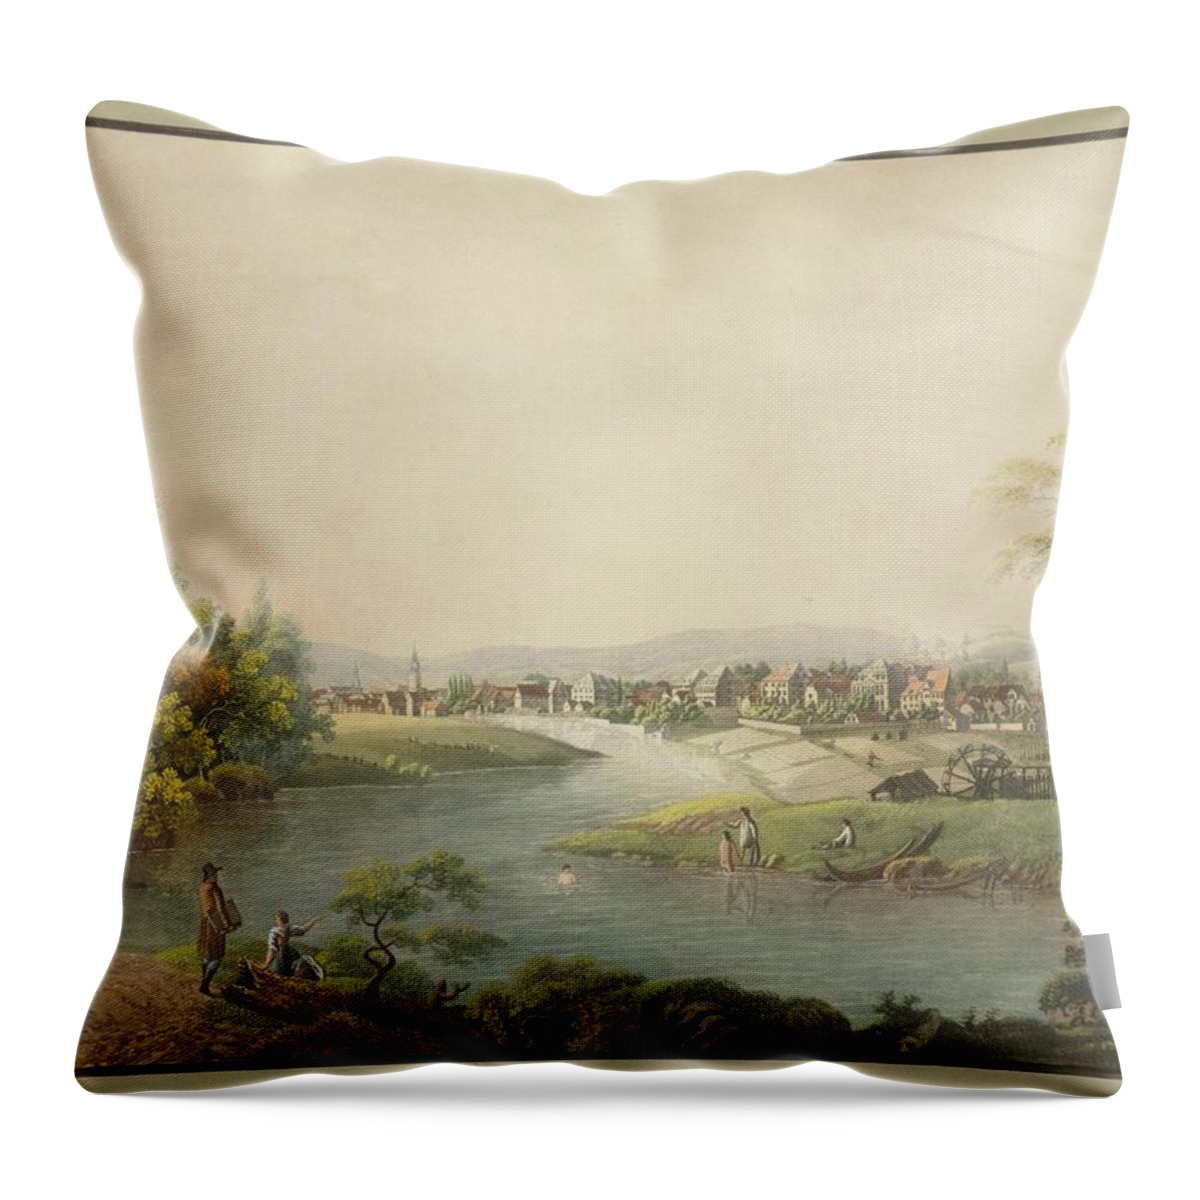 Bleuler Throw Pillow featuring the painting Blick auf Elberfeld vom Norden by MotionAge Designs